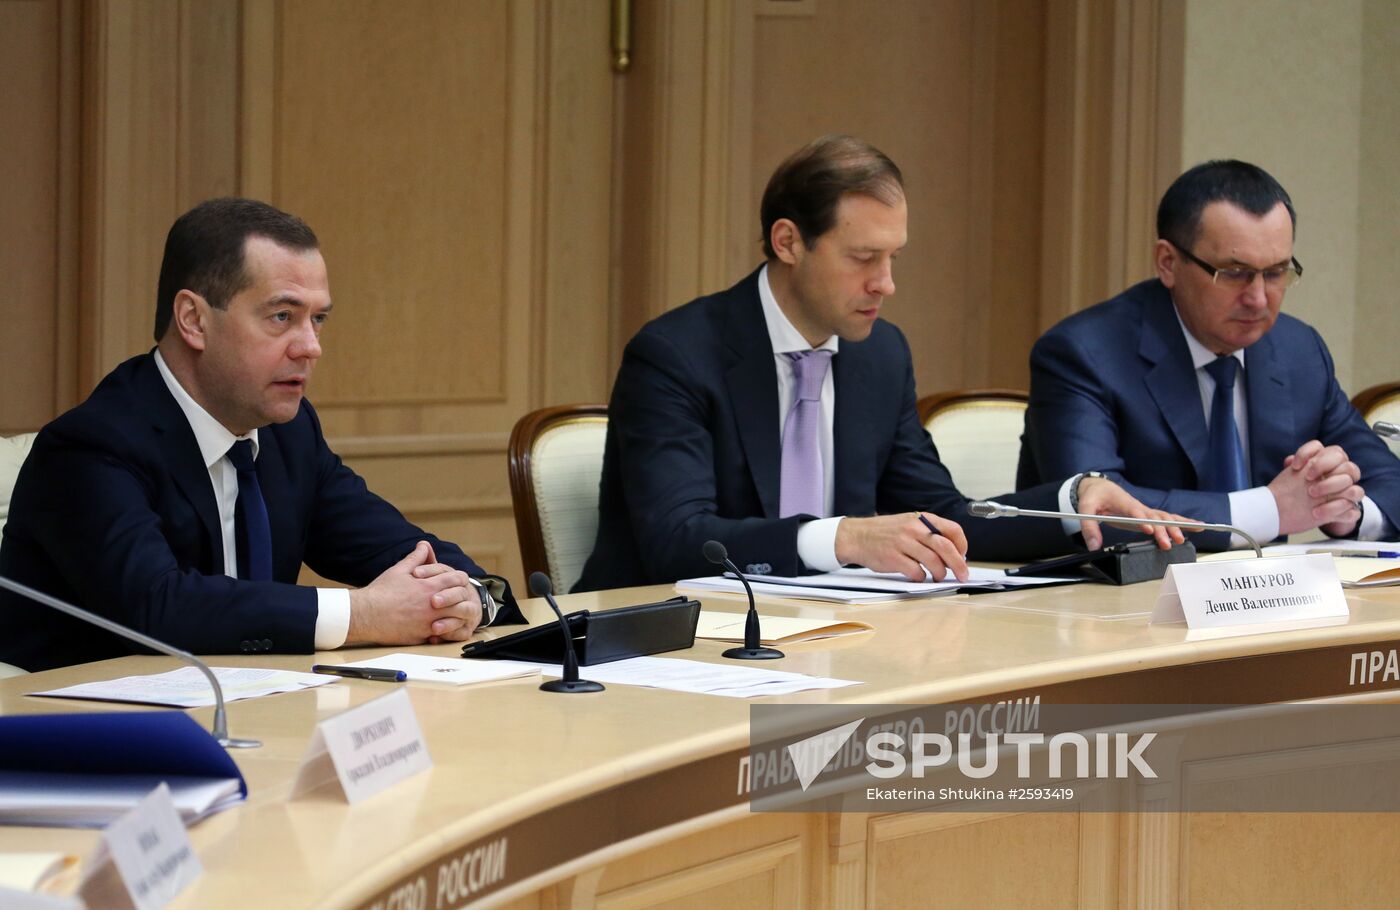 Prime Minister Dmitry Medvedev chairs teleconference on seasonal field work